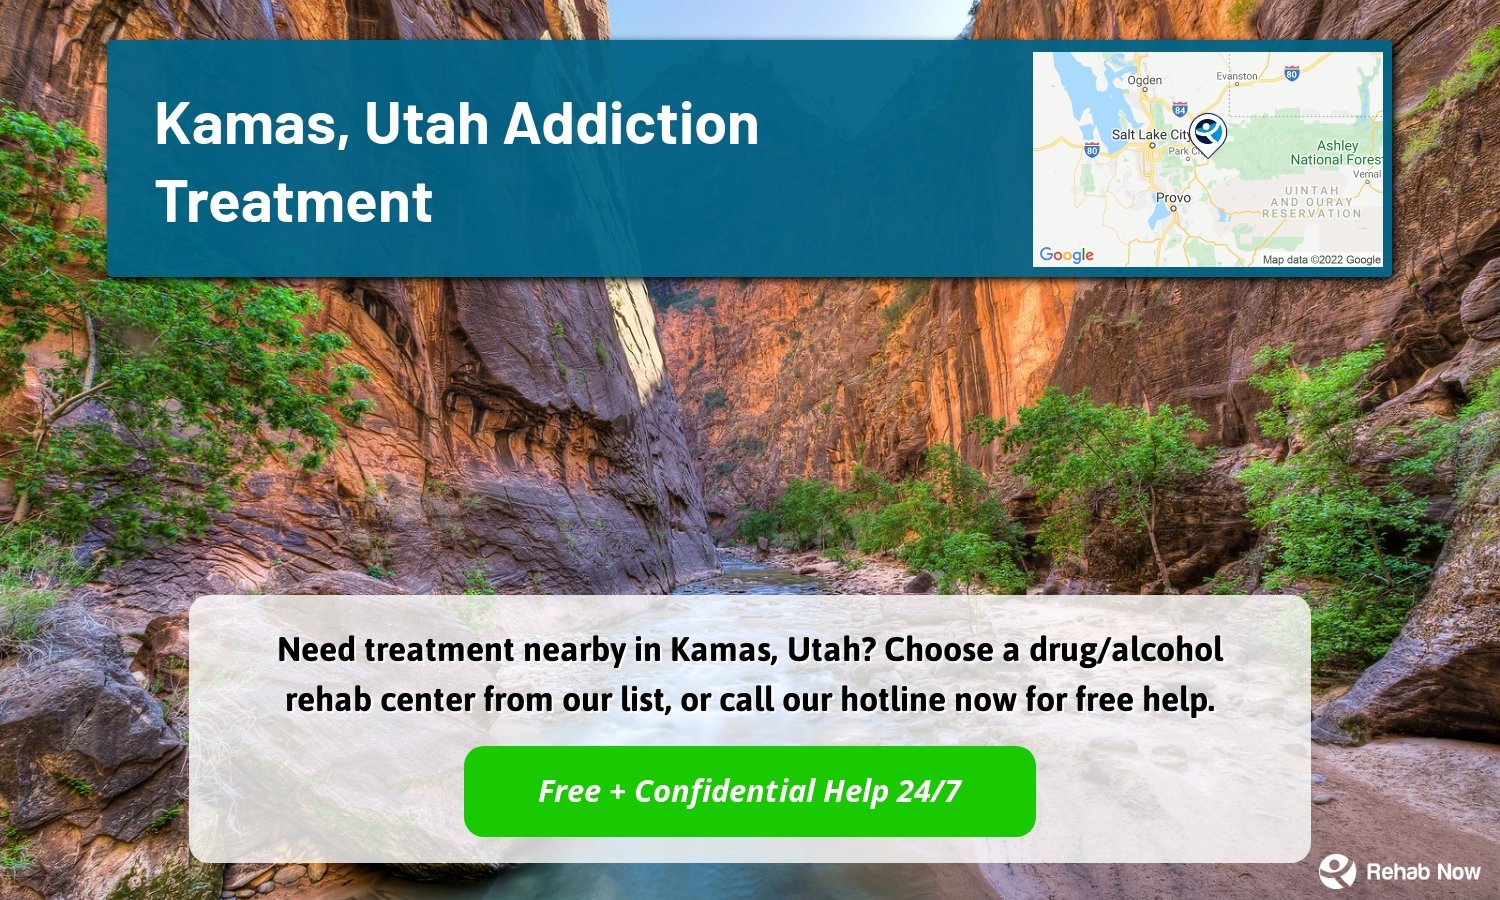 Need treatment nearby in Kamas, Utah? Choose a drug/alcohol rehab center from our list, or call our hotline now for free help.